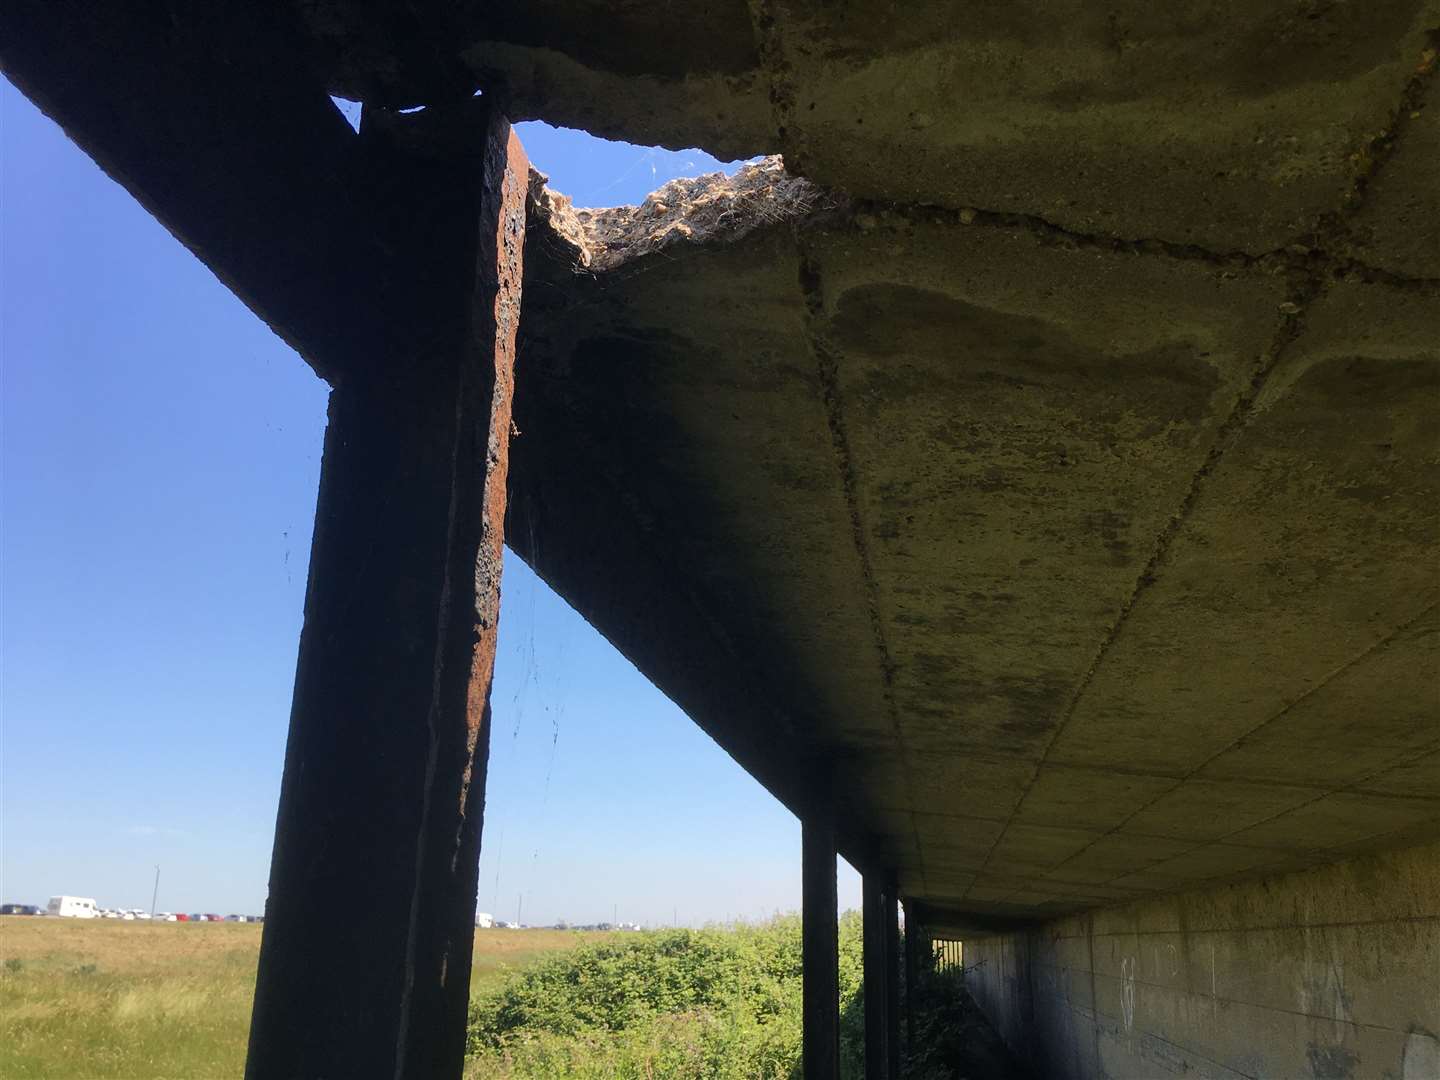 Dangerous: The covered way at Barton's Point Coastal Park, Sheerness, protected scorers and the public from being shot during tests at the Queenborough Lines firing range during the war.